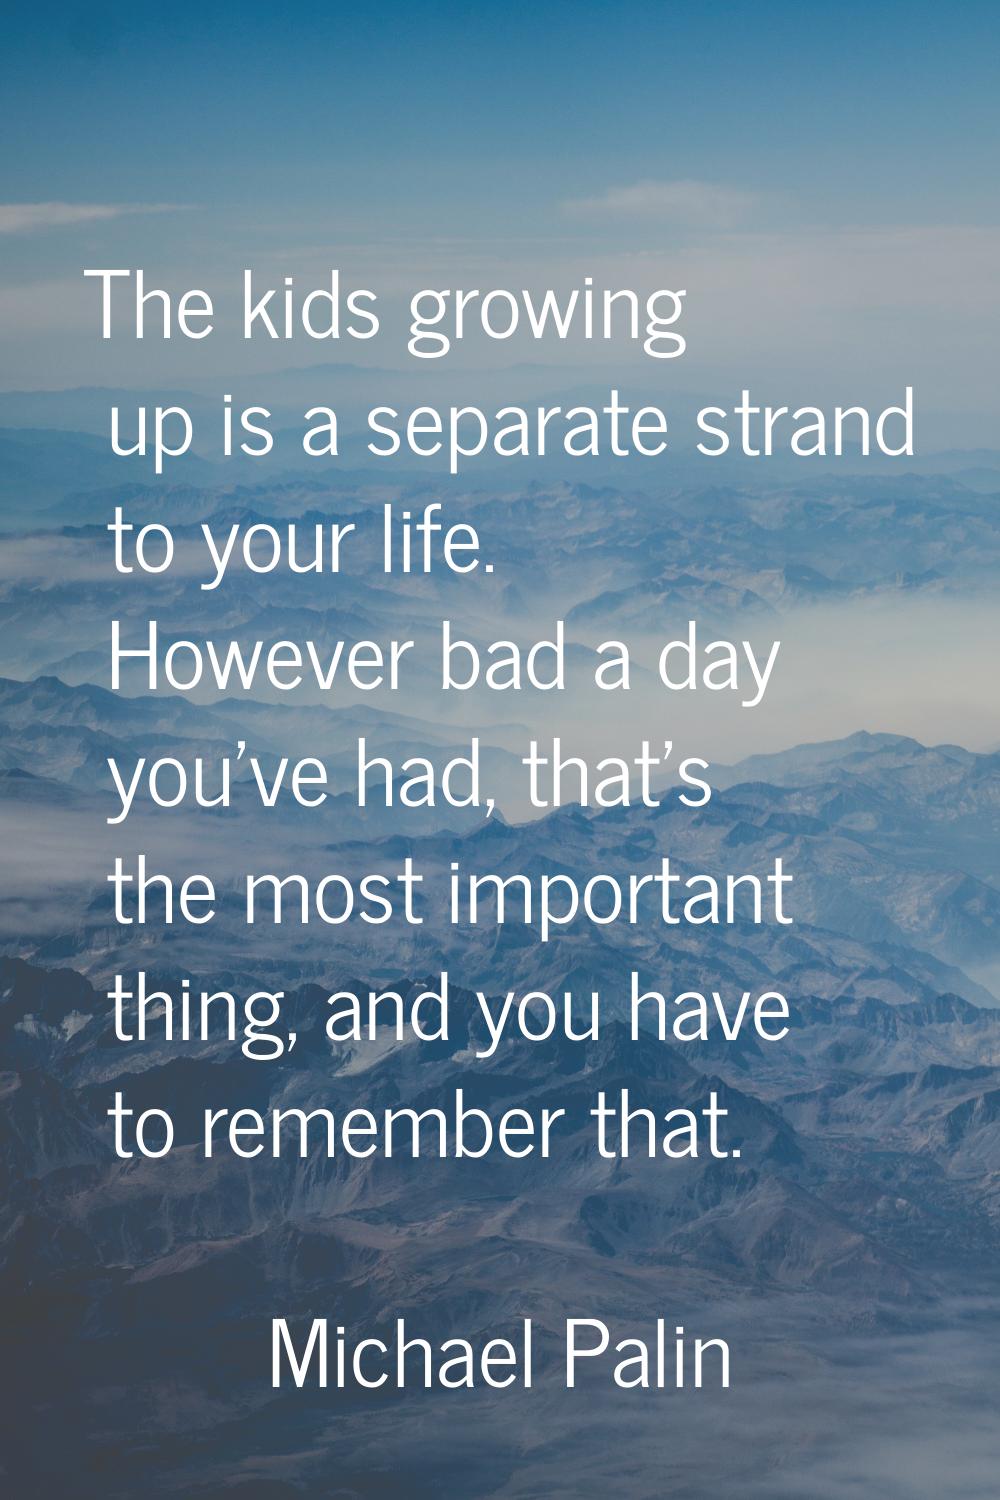 The kids growing up is a separate strand to your life. However bad a day you've had, that's the mos